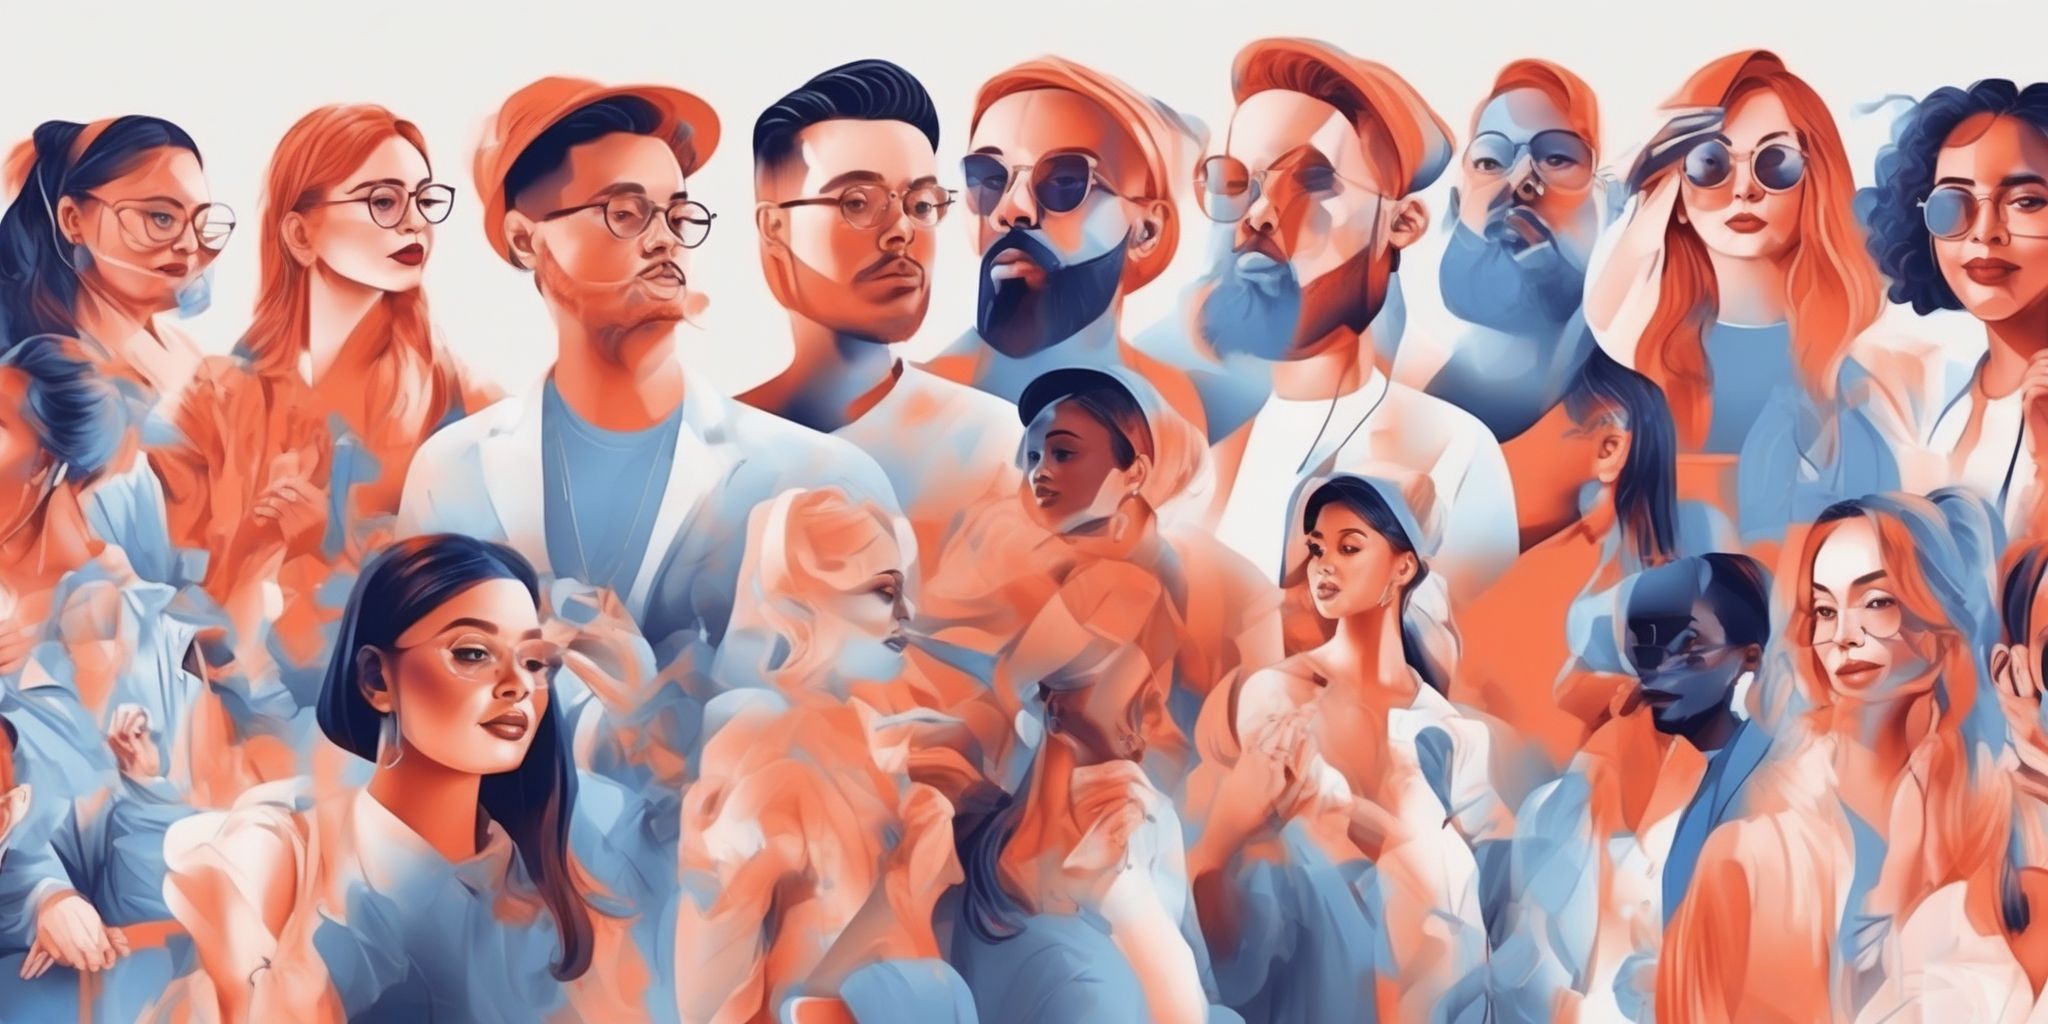 Influencers in illustration style with gradients and white background